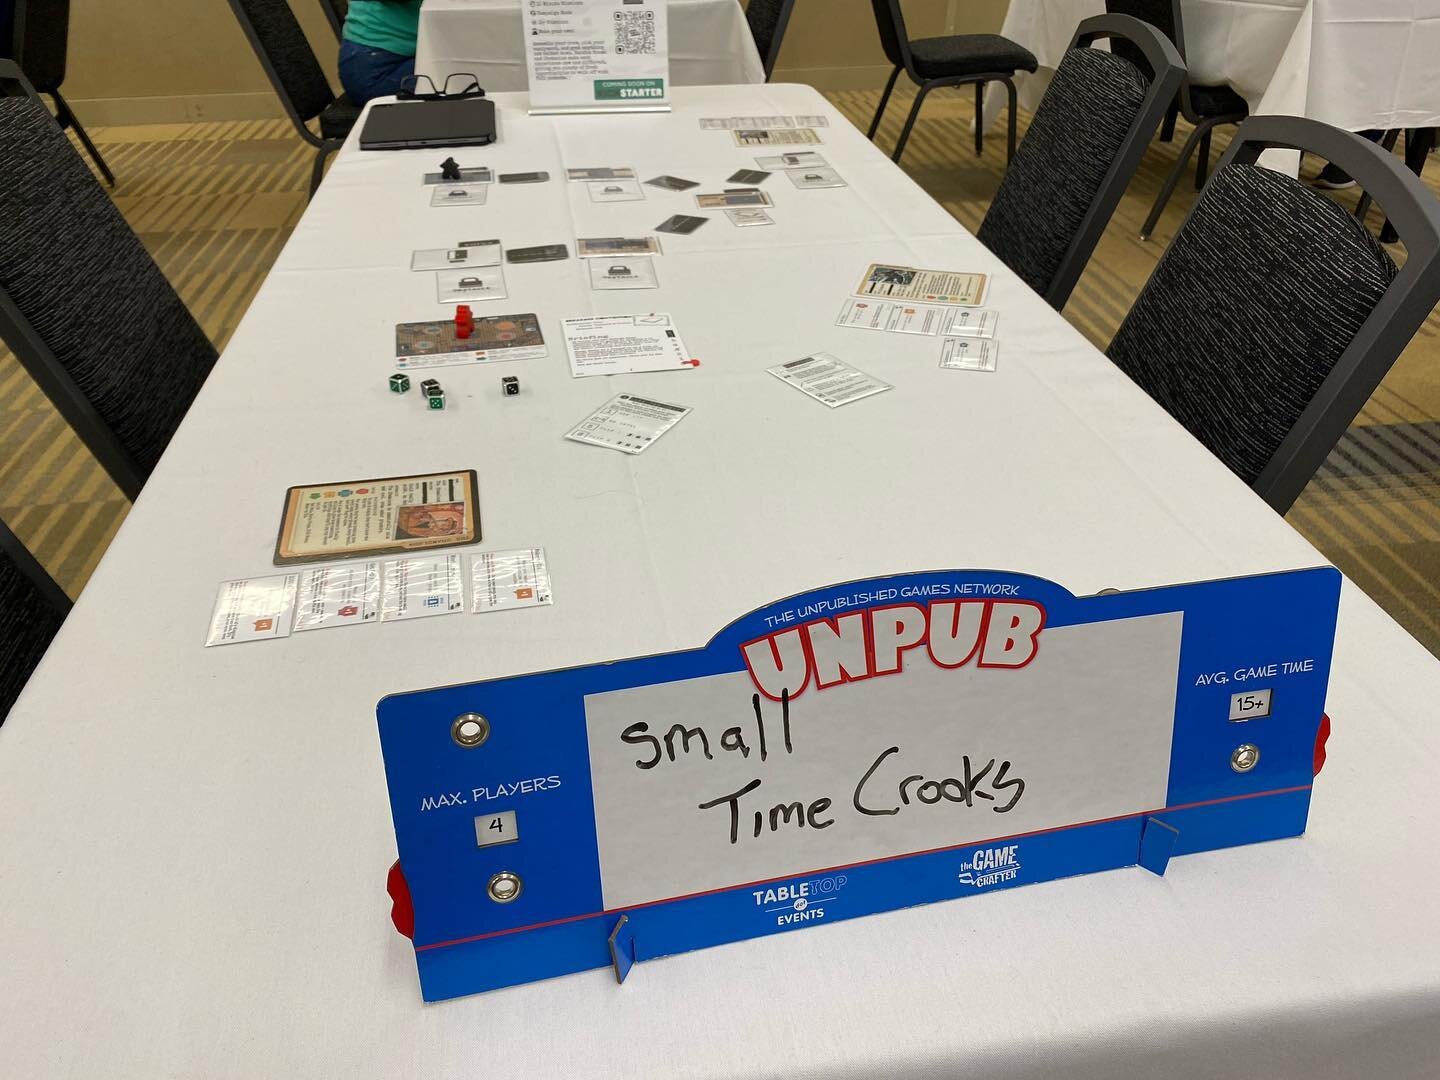 Join us for a special #con themed heist! We're in the @theunpub booth B131 at @originsgamefair #originsgamefair #cardgame #strategy #comingsoon #kickstarter